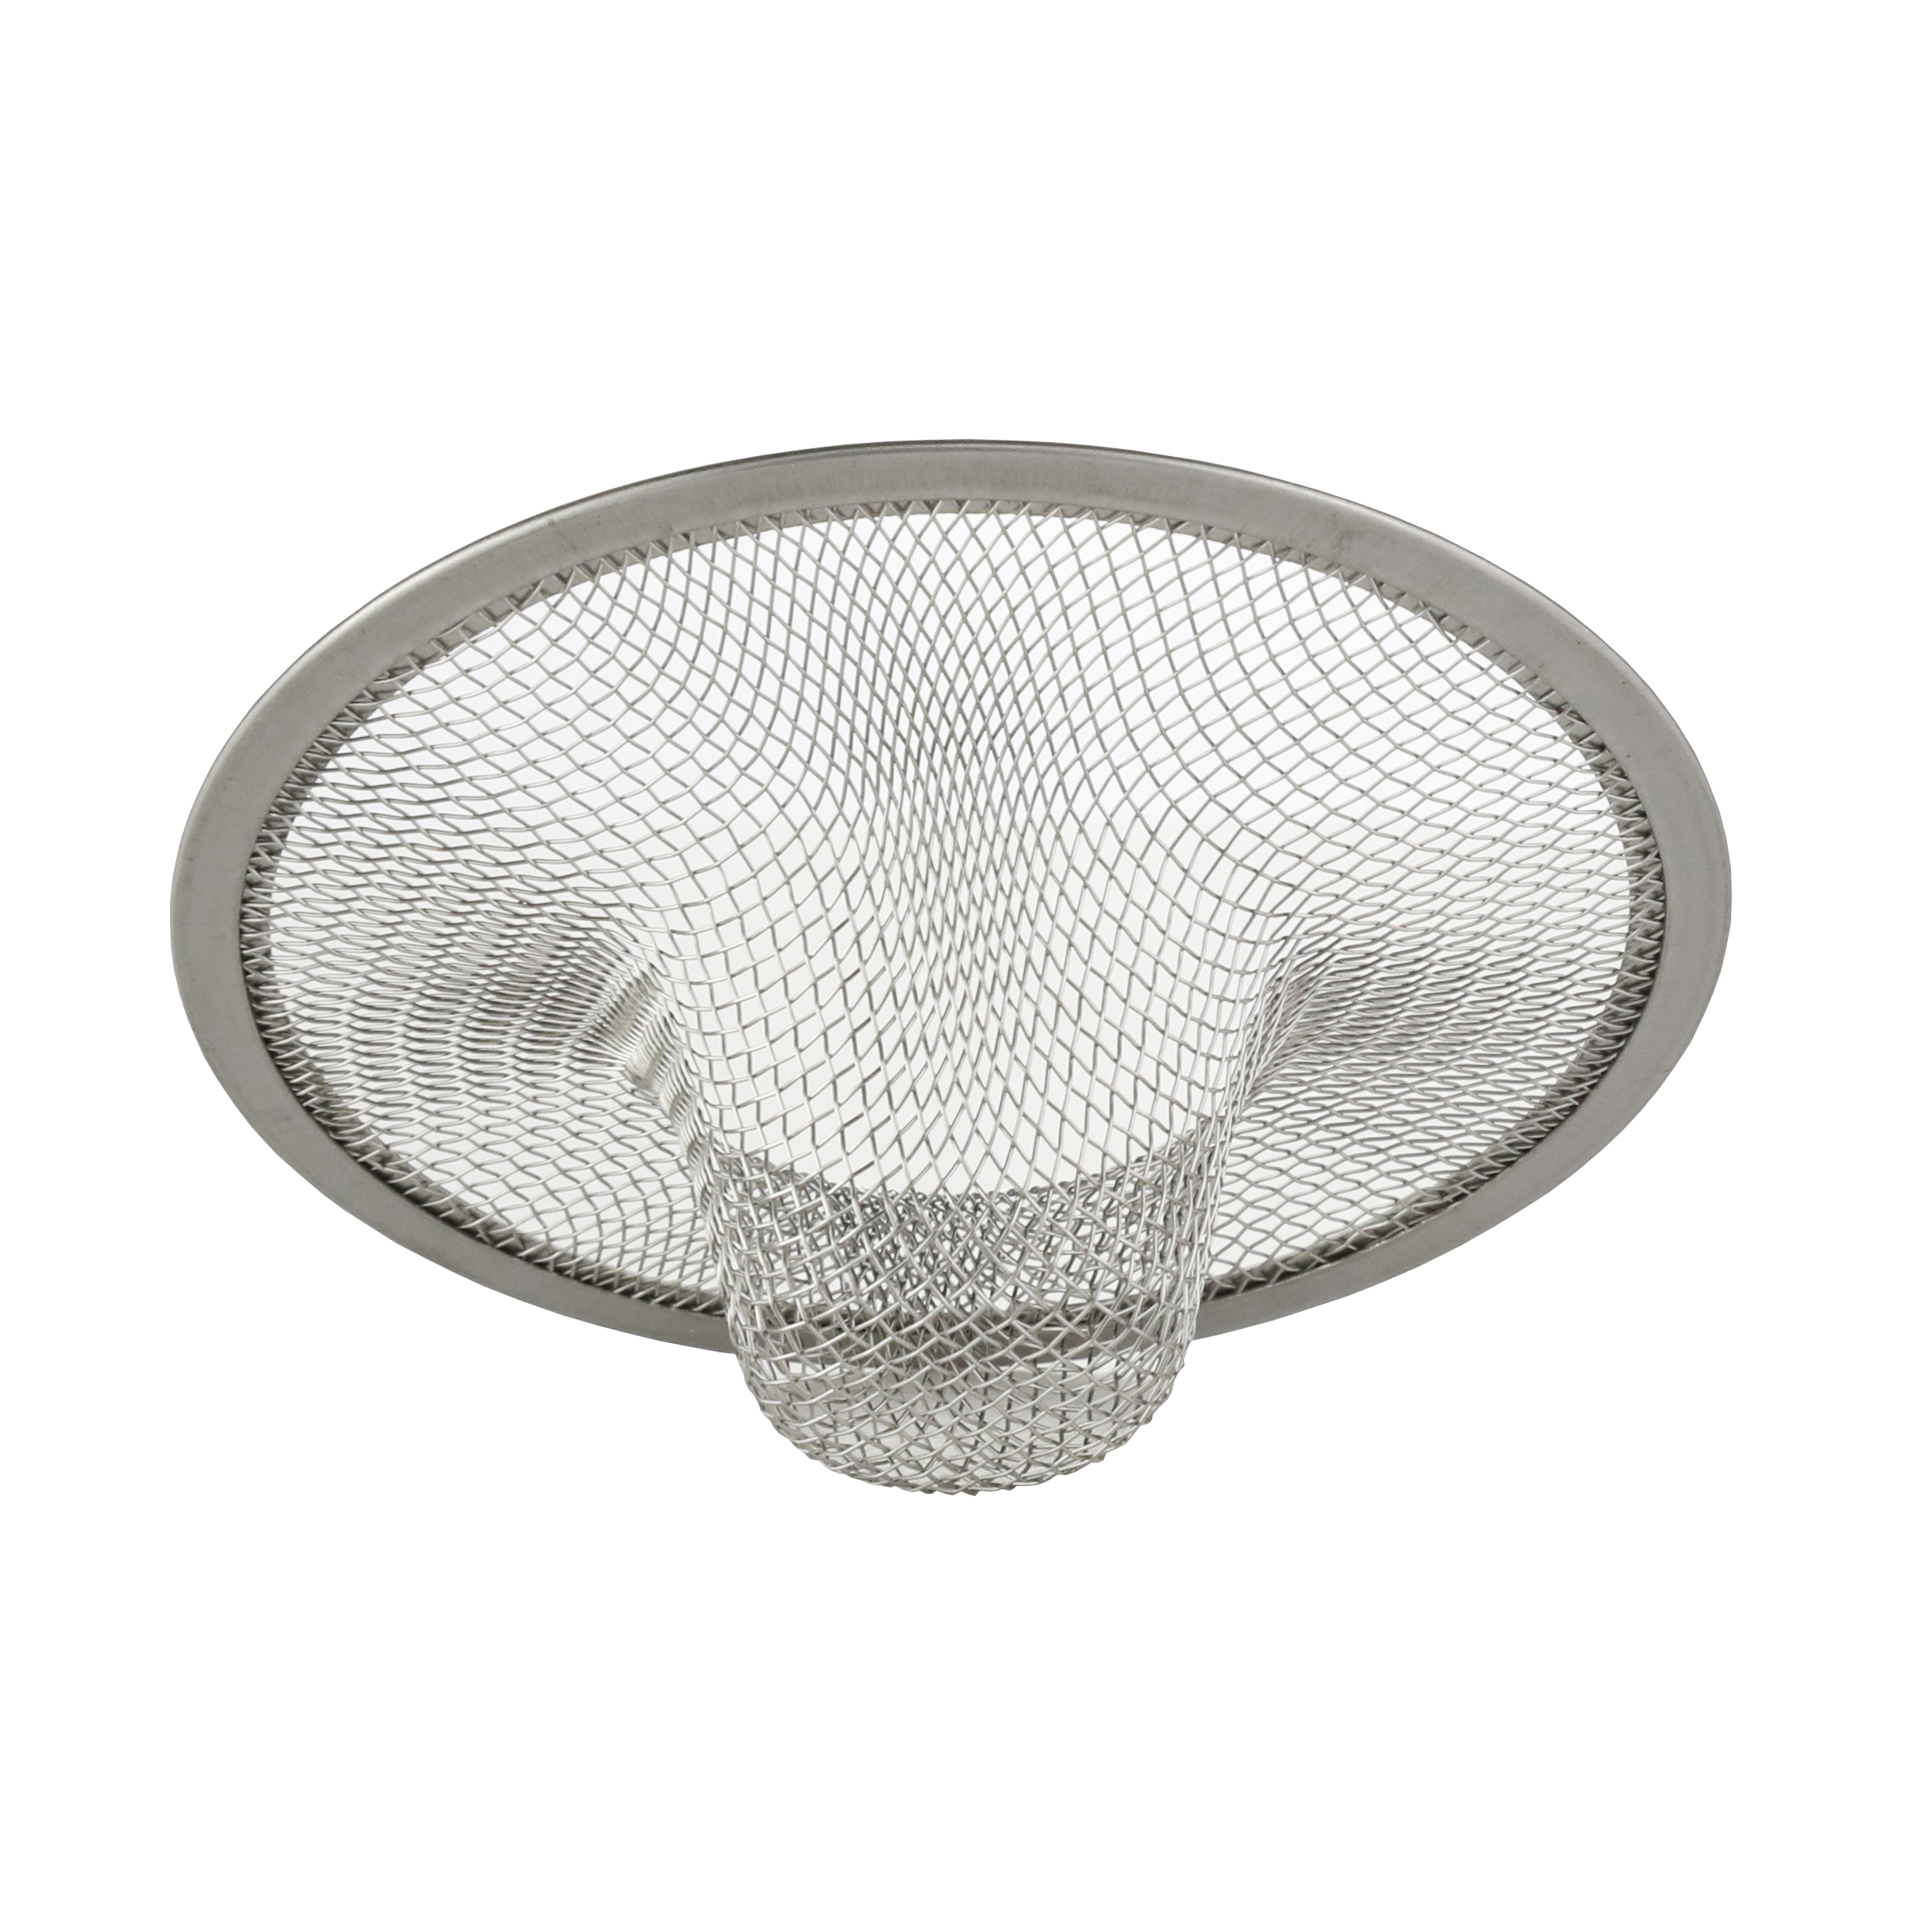 DANCO 2-3/4 in. Mesh Tub Strainer in Stainless Steel 88821 - The Home Depot